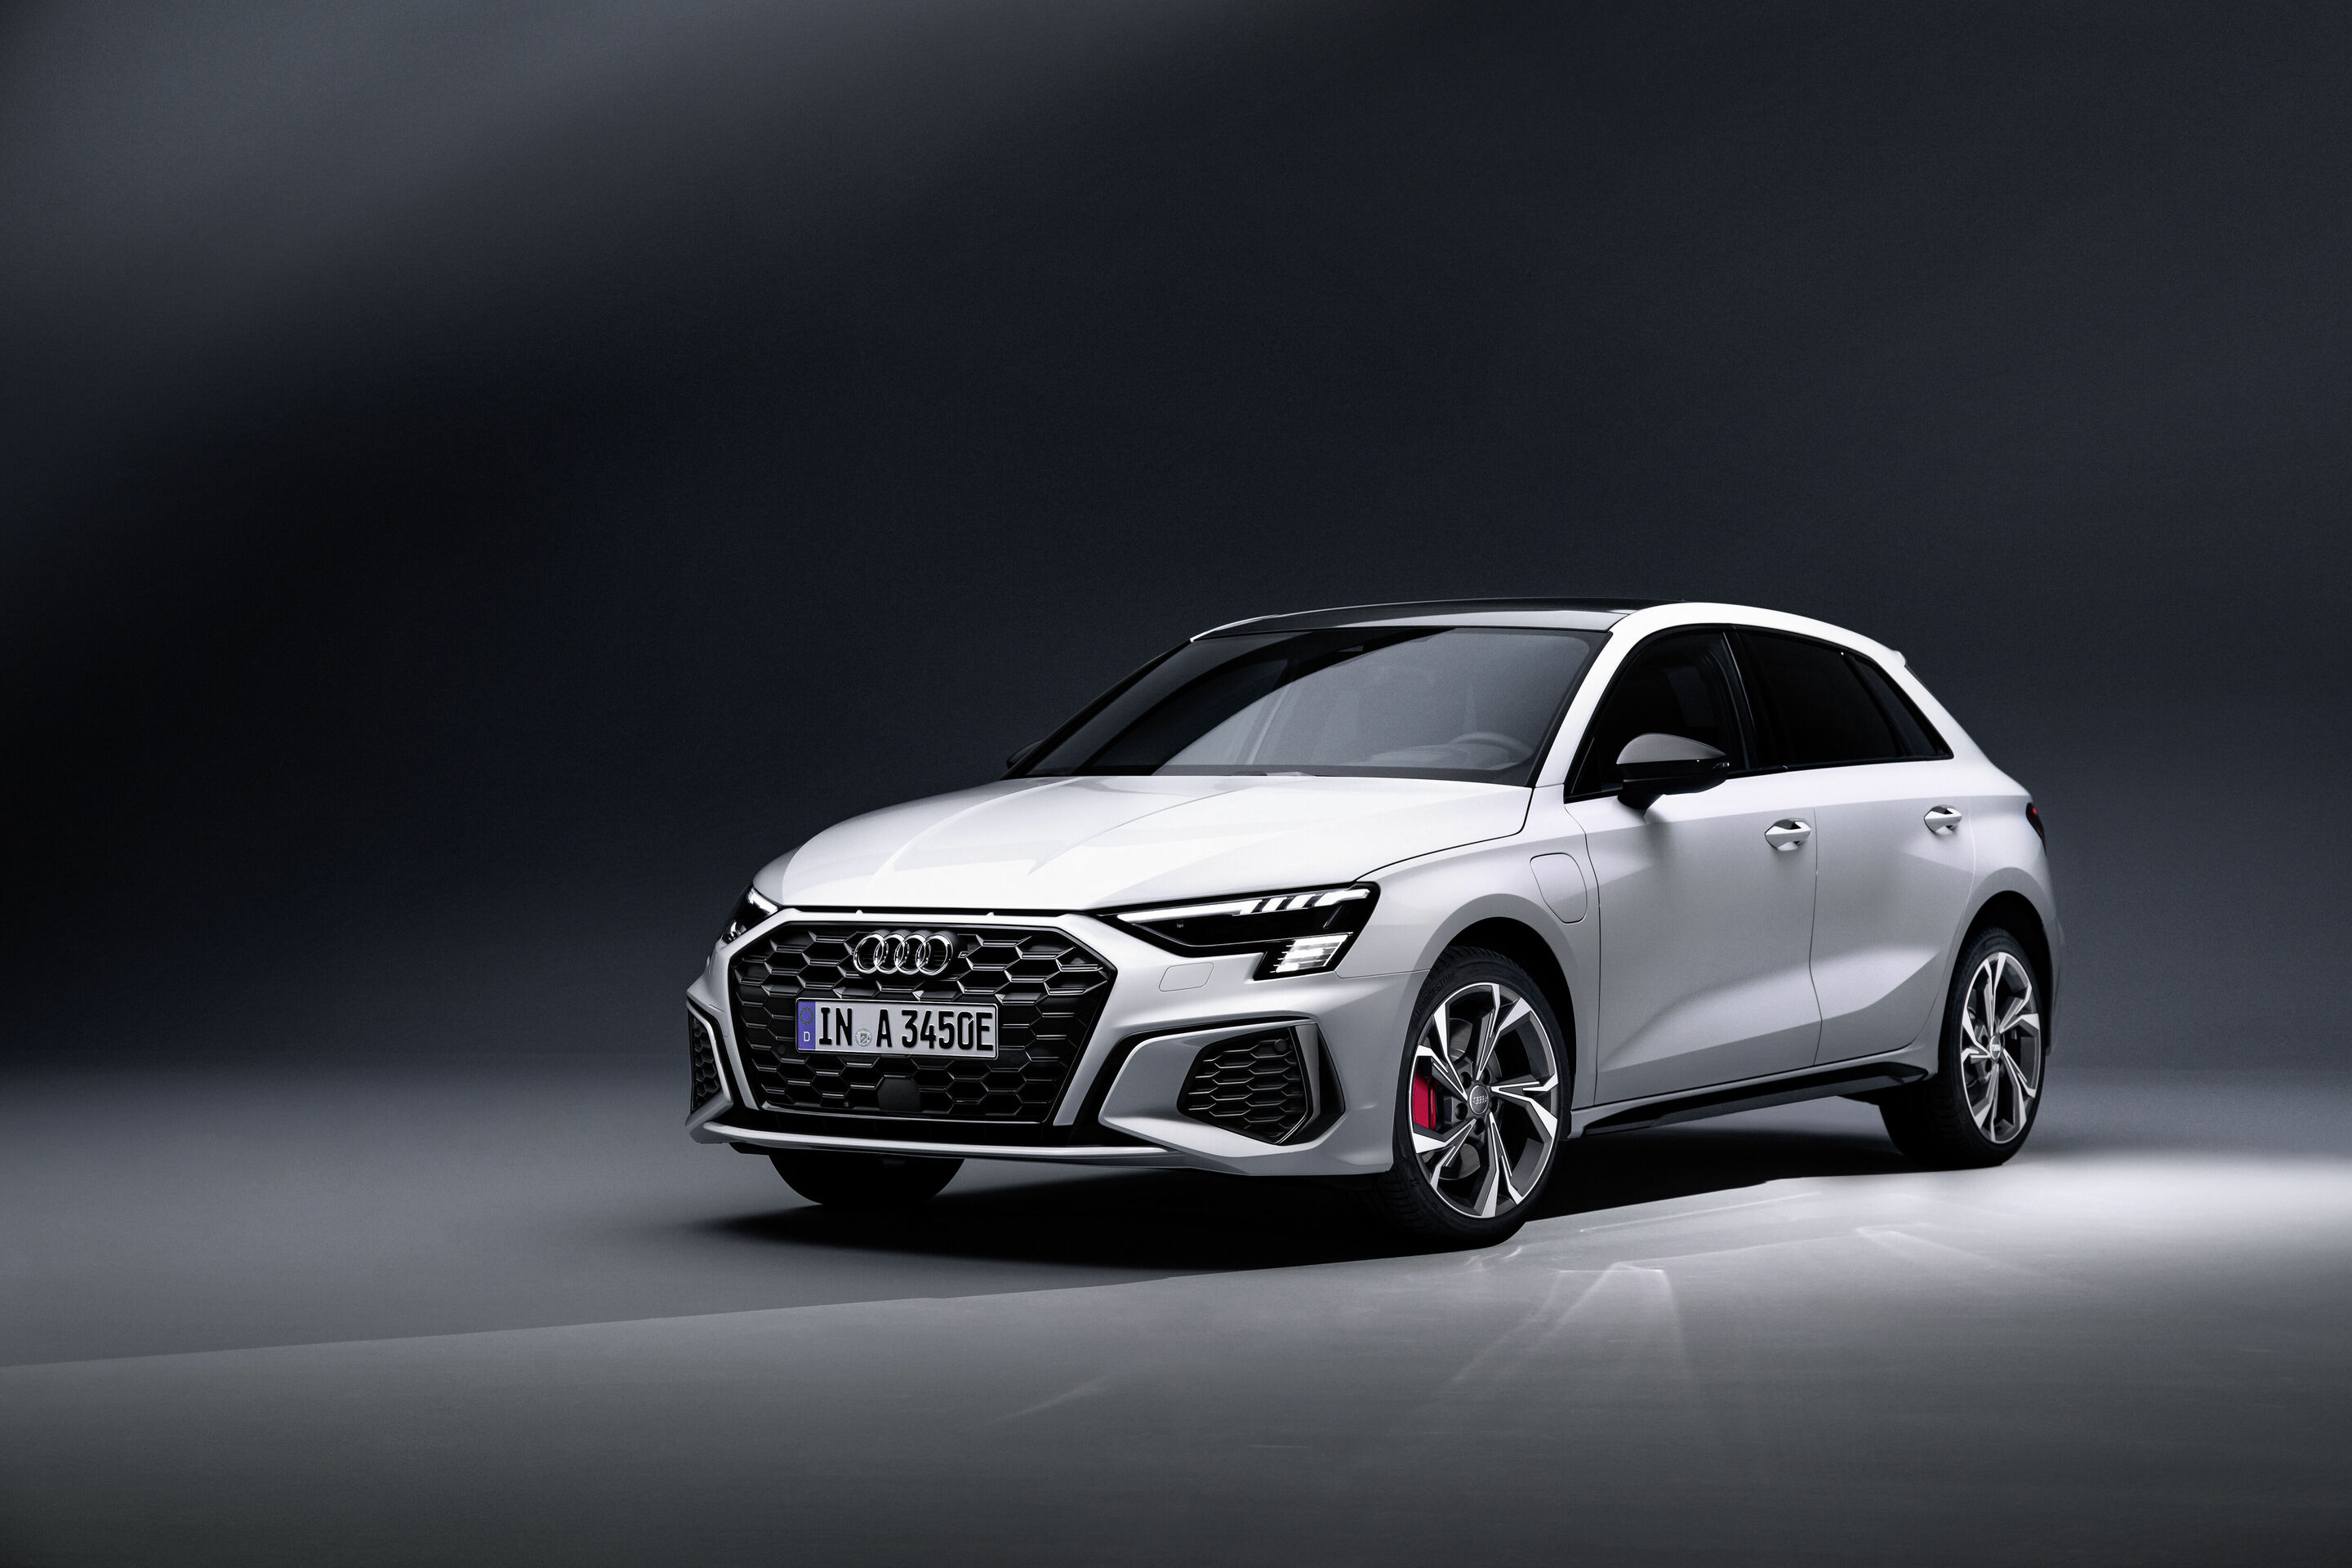 Audi A3 Sportback  Speed Luxury & All Your Questions Answered